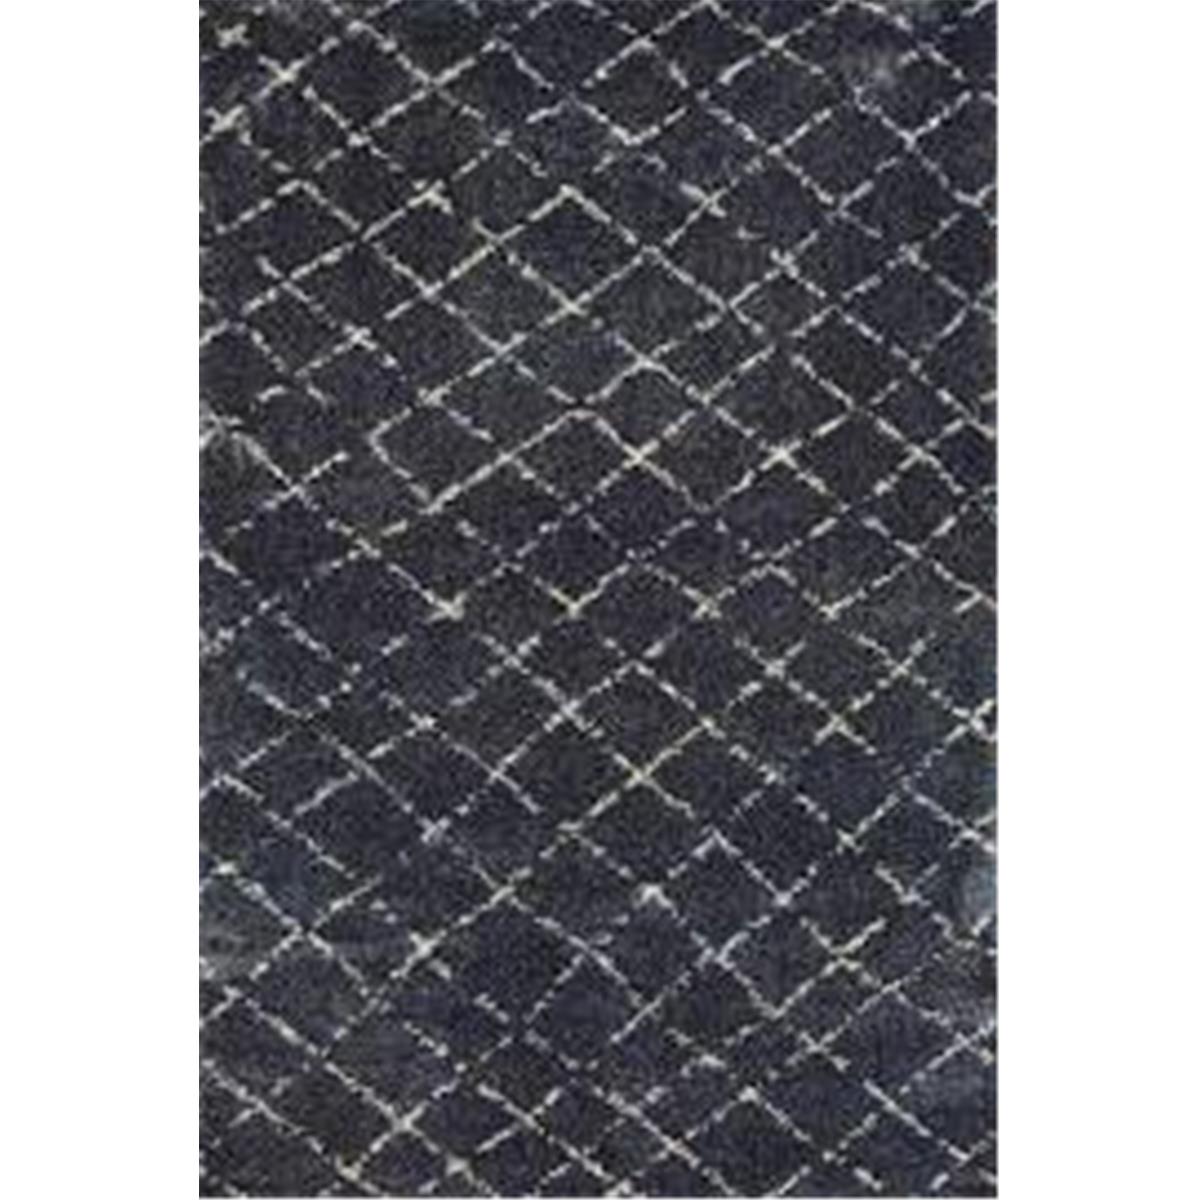 43317459710112t 7 Ft. 10 In. X 11 Ft. 2 In. Bromley Gio Rug, Navy & Grey